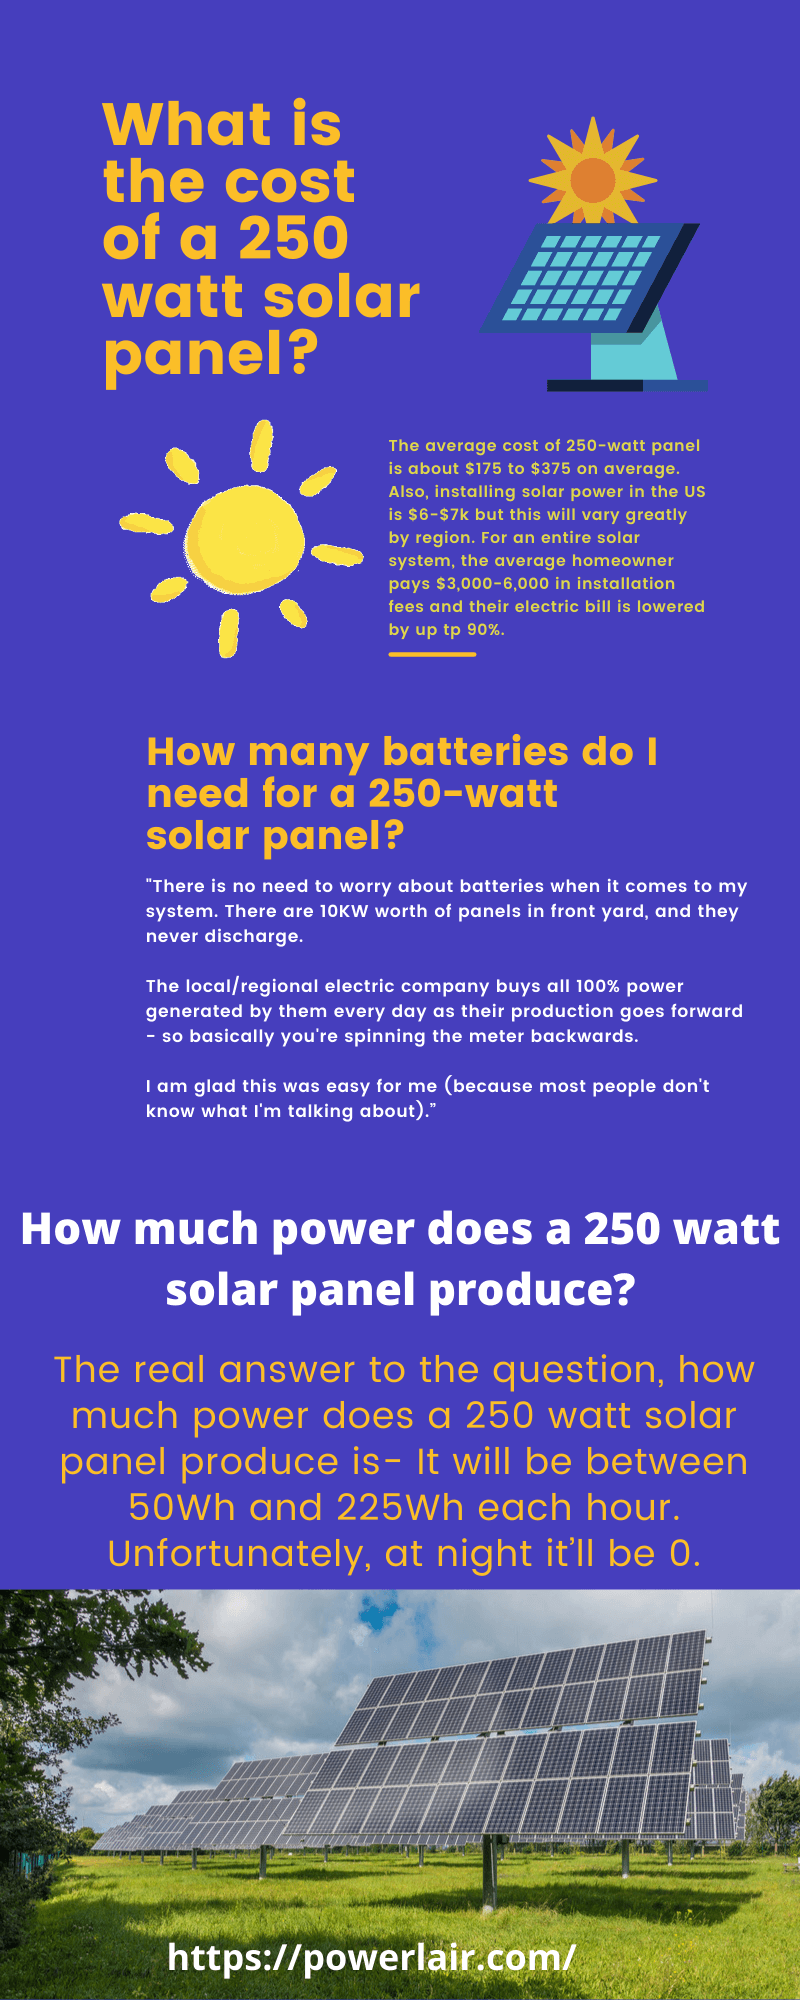 What is the cost of a 250 watt solar panel